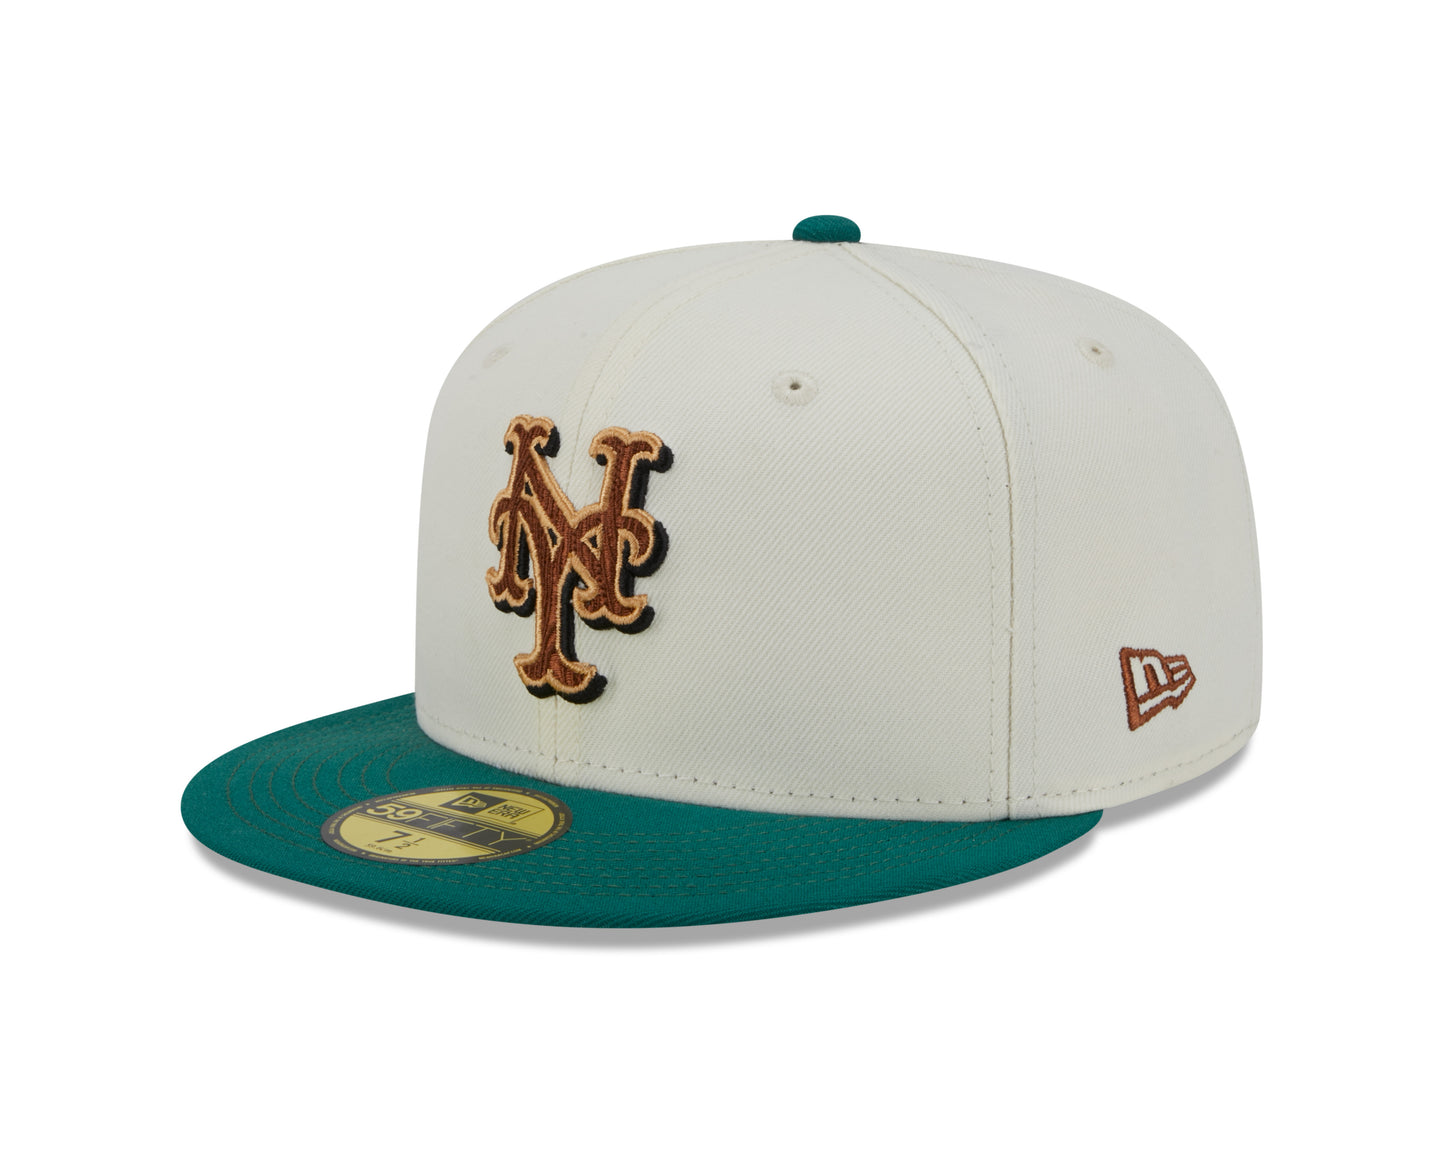 New Era - 59Fifty Fitted Cap - CAMP - New York Mets 25th Anniversary - White/Green - Headz Up 